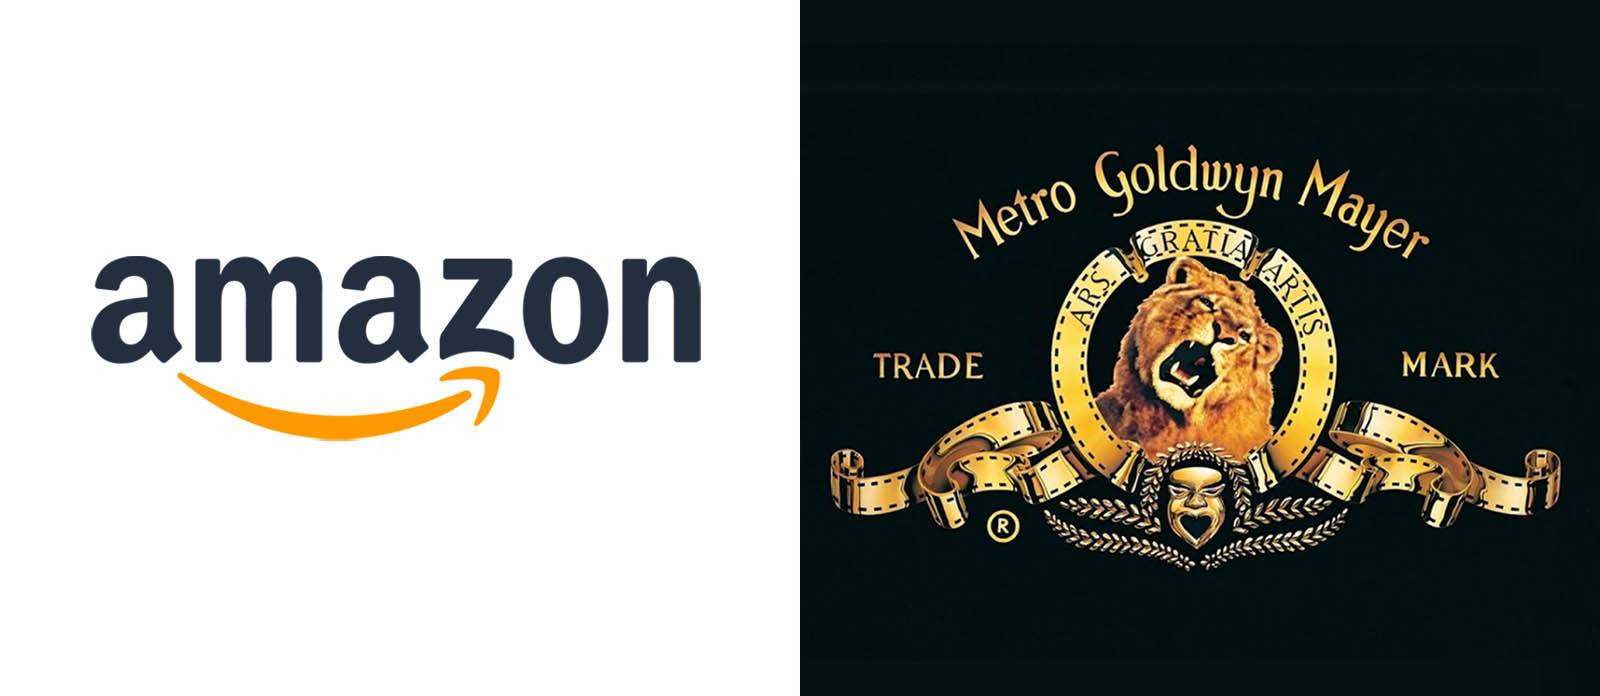 Amazon’s $8.45 Billion MGM Deal Could Get FTC Antitrust Review